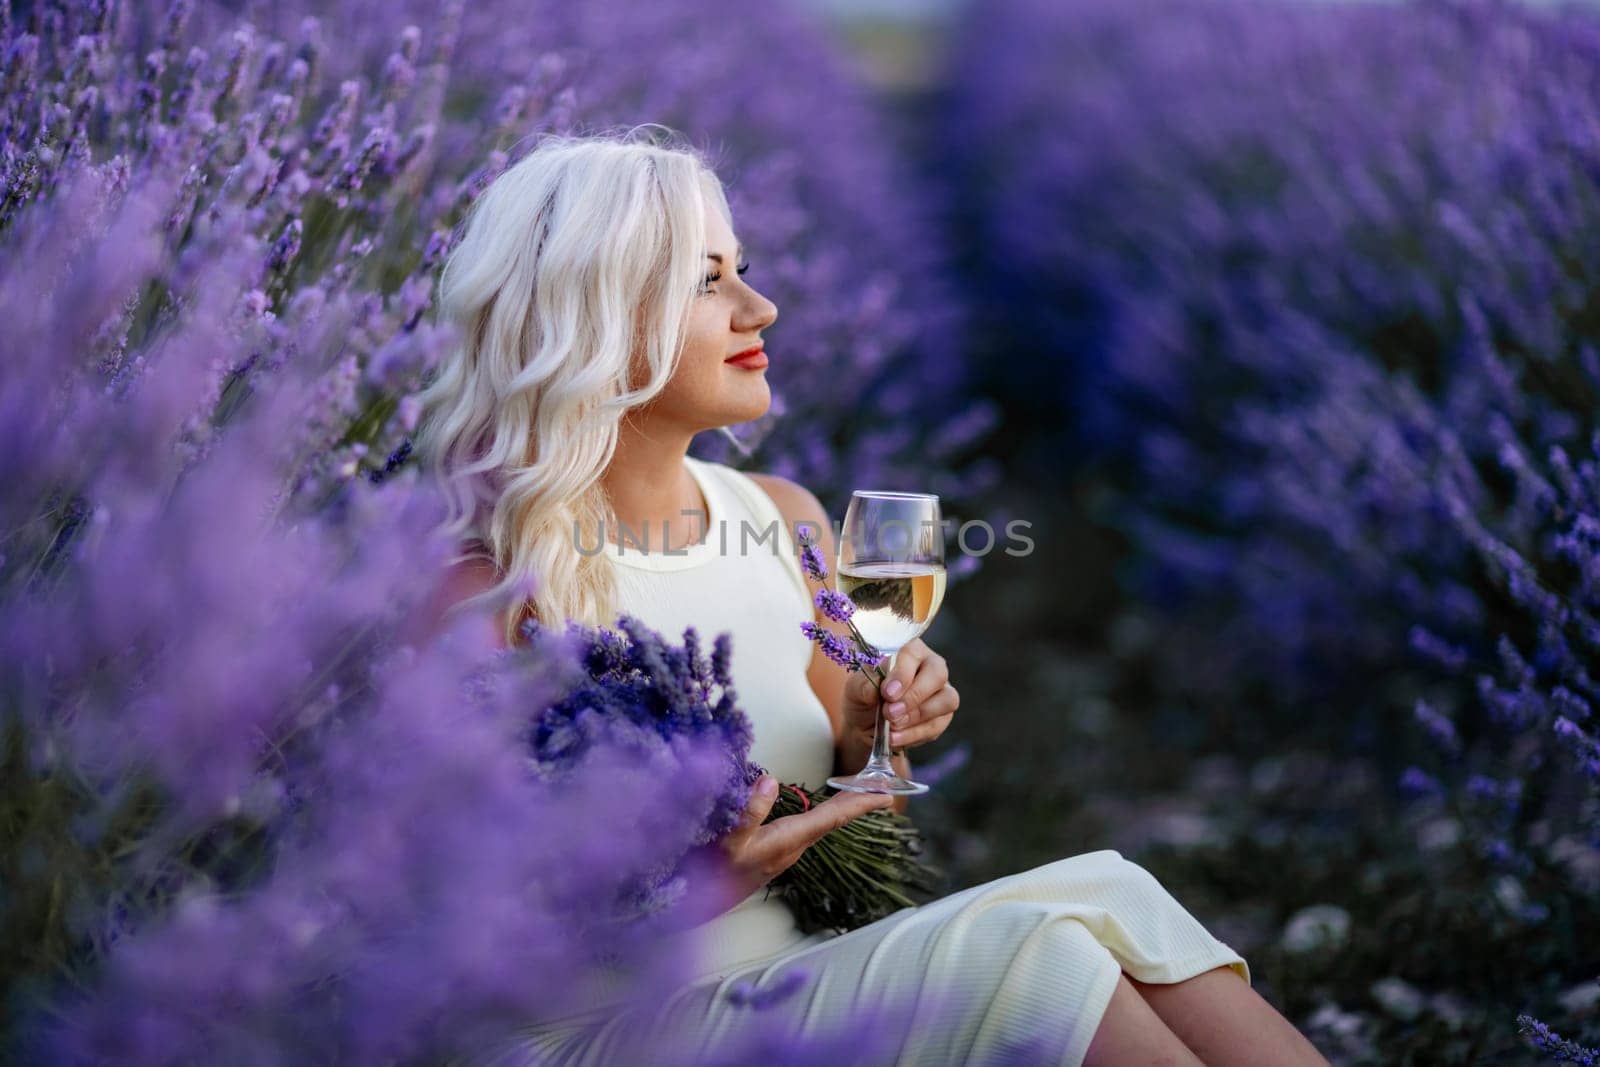 Blonde lavender field holds a glass of white wine in her hands. Happy woman in white dress enjoys lavender field picnic holding a large bouquet of lavender in her hands . Illustrating woman's picnic in a lavender field